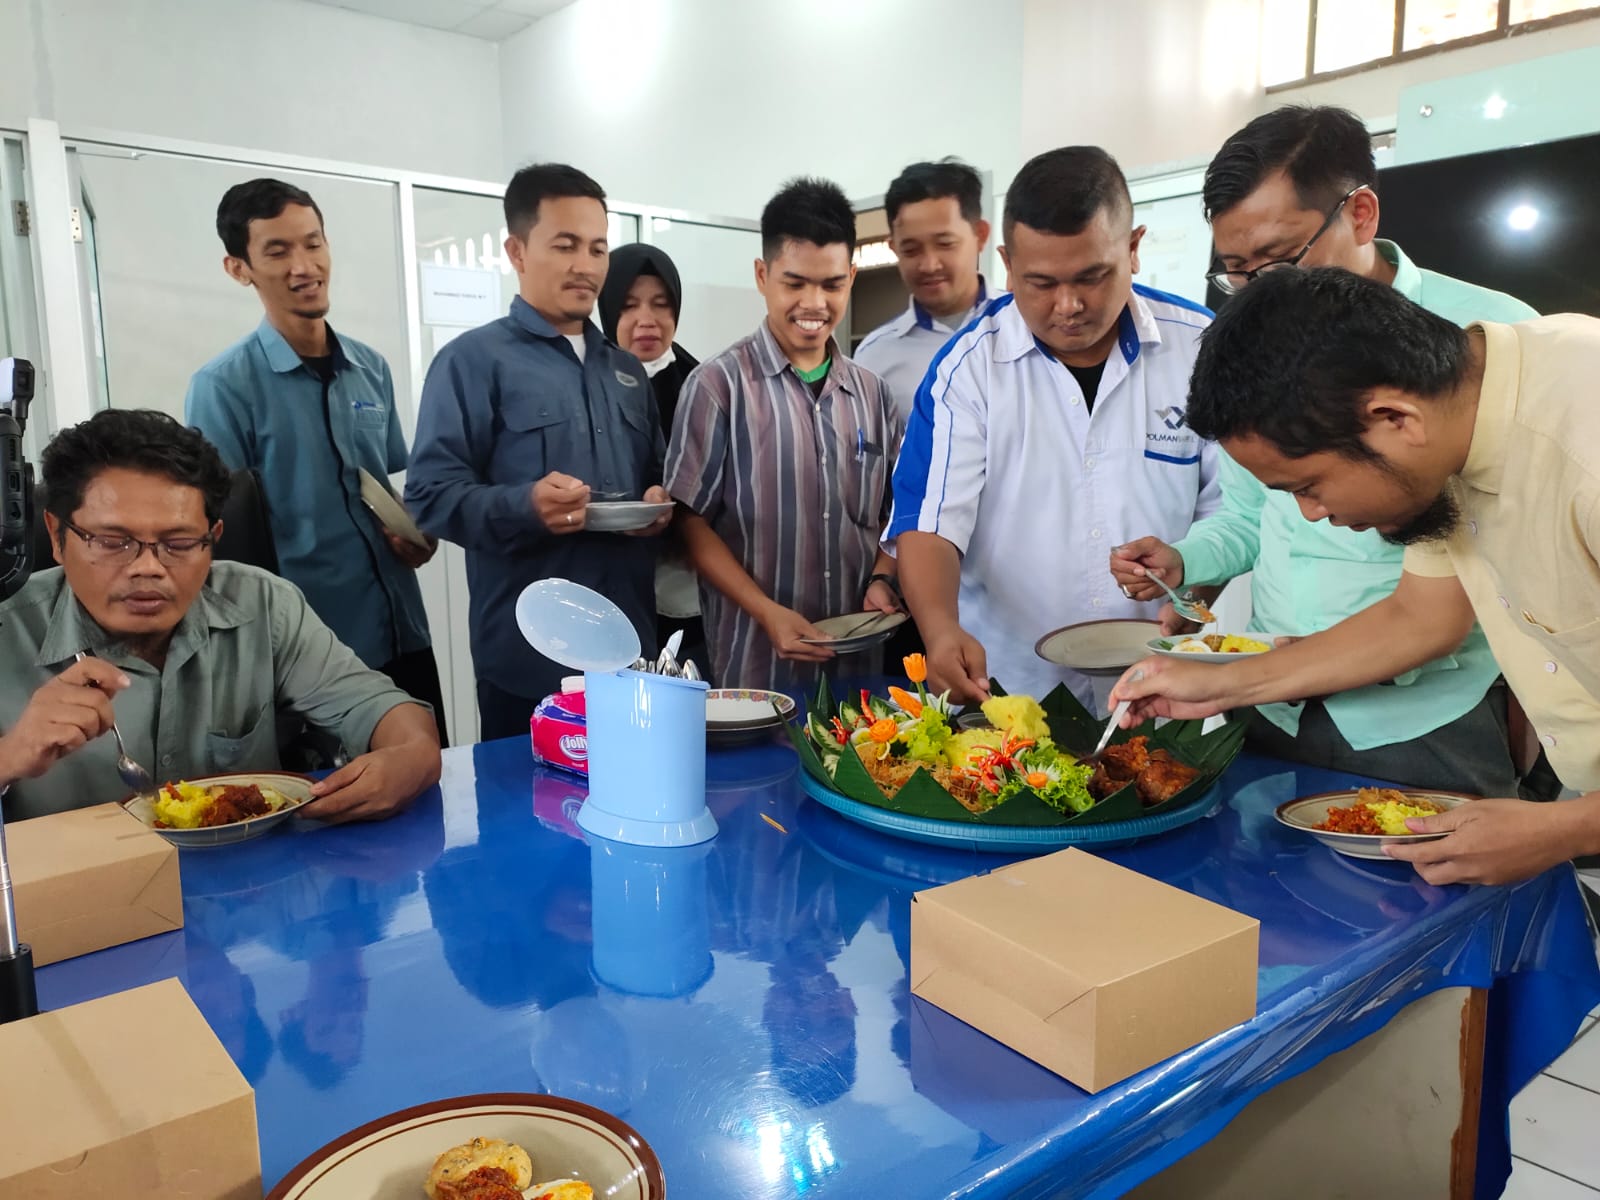 Mechanical Design Engineering Study Program, held a Tumpeng Cut in Obtaining Superior Accreditation